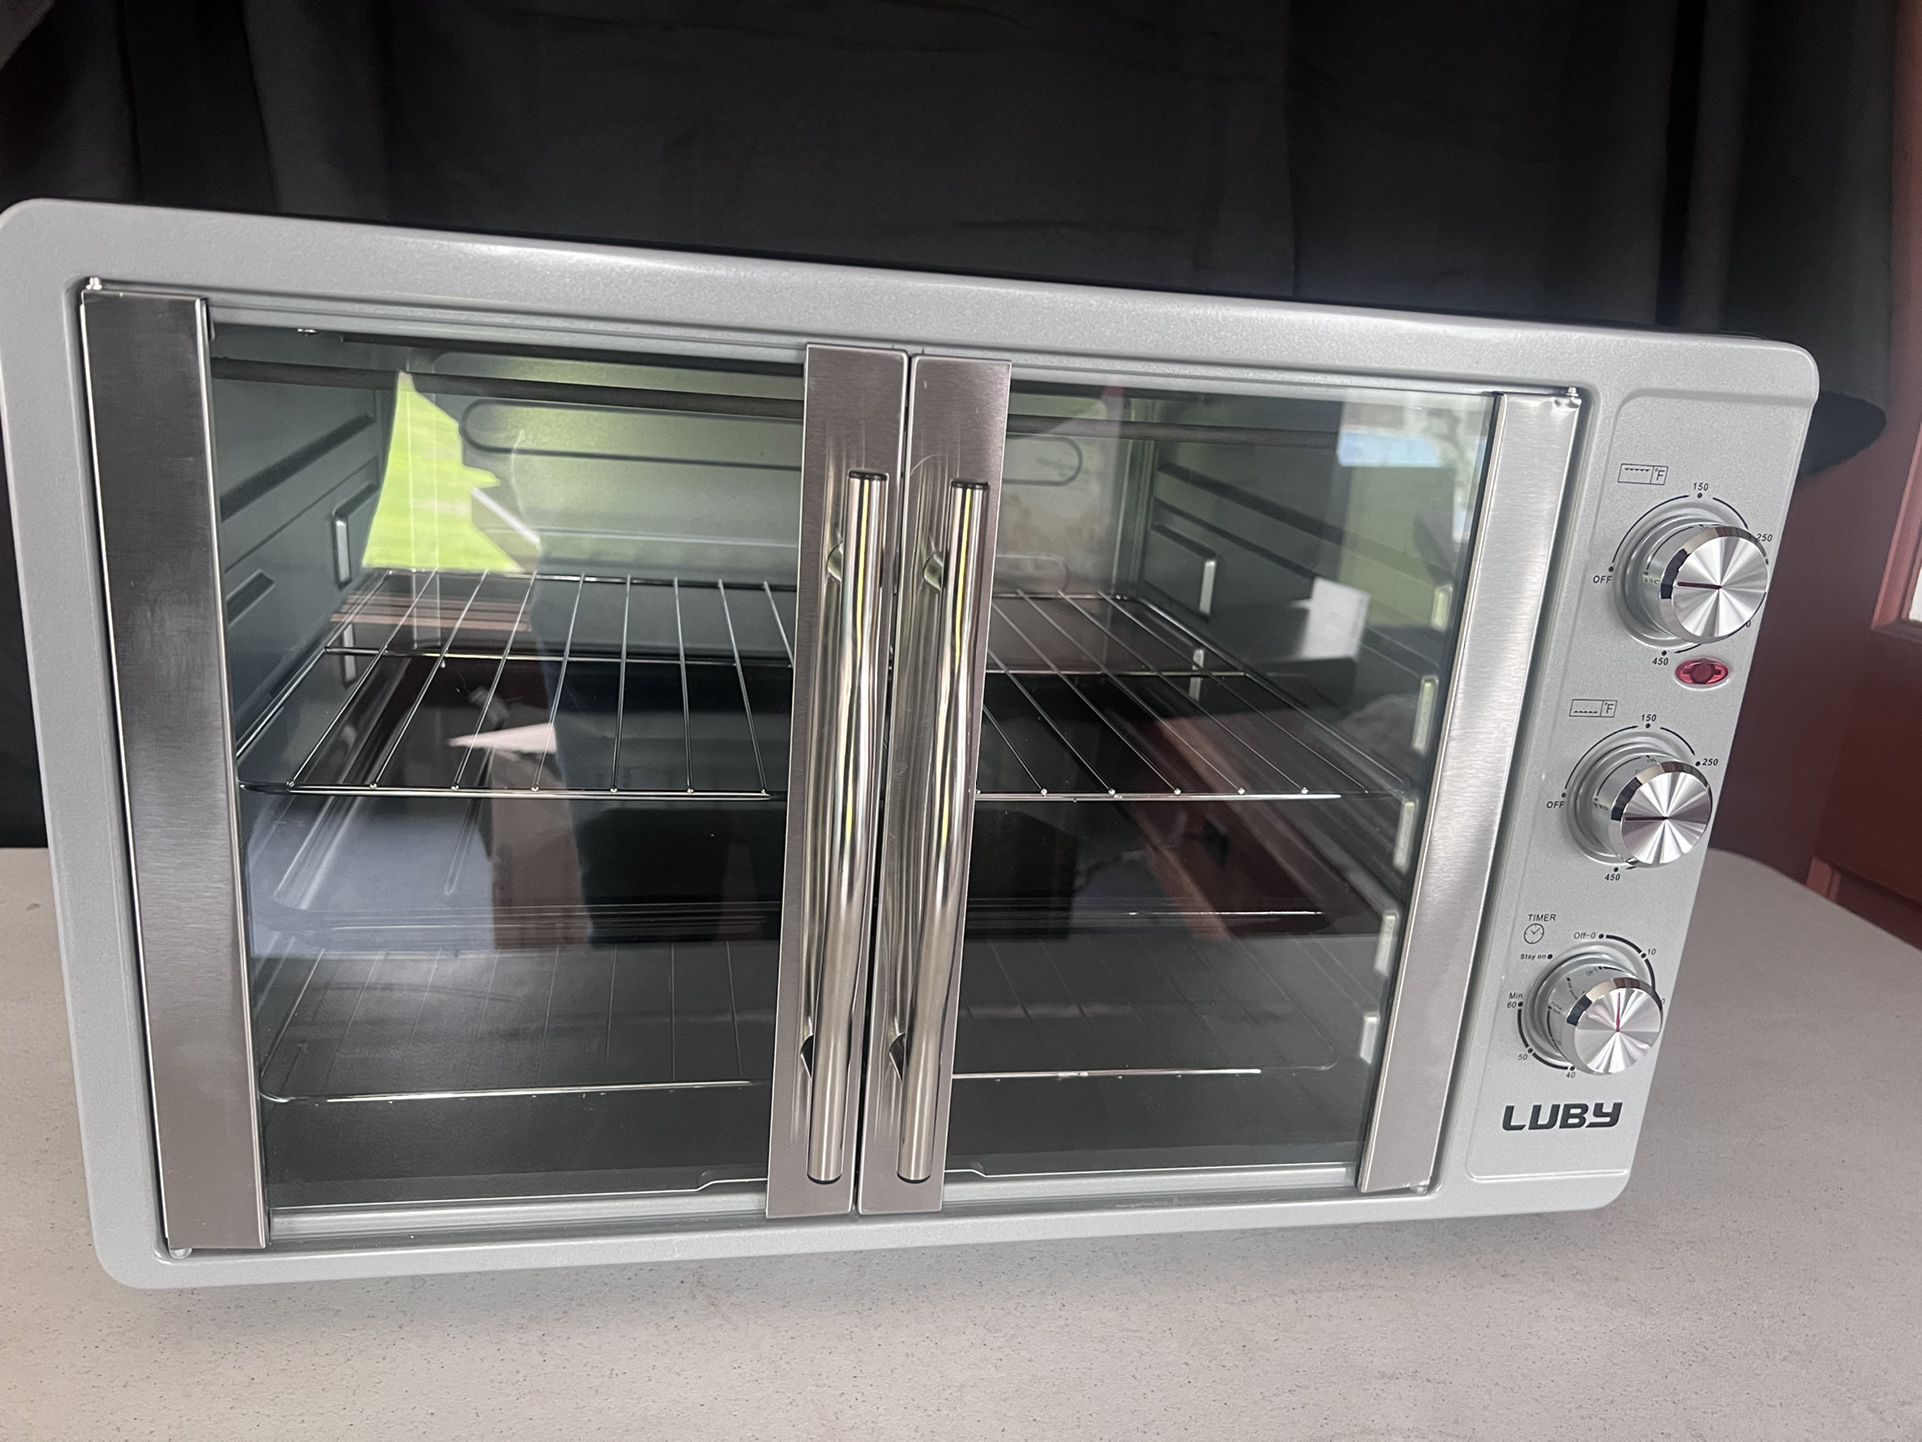 LUBY Large Toaster Oven Countertop, French Door Designed, 55L, 18 Slices,  14'' pizza, 20lb Turkey, Silver